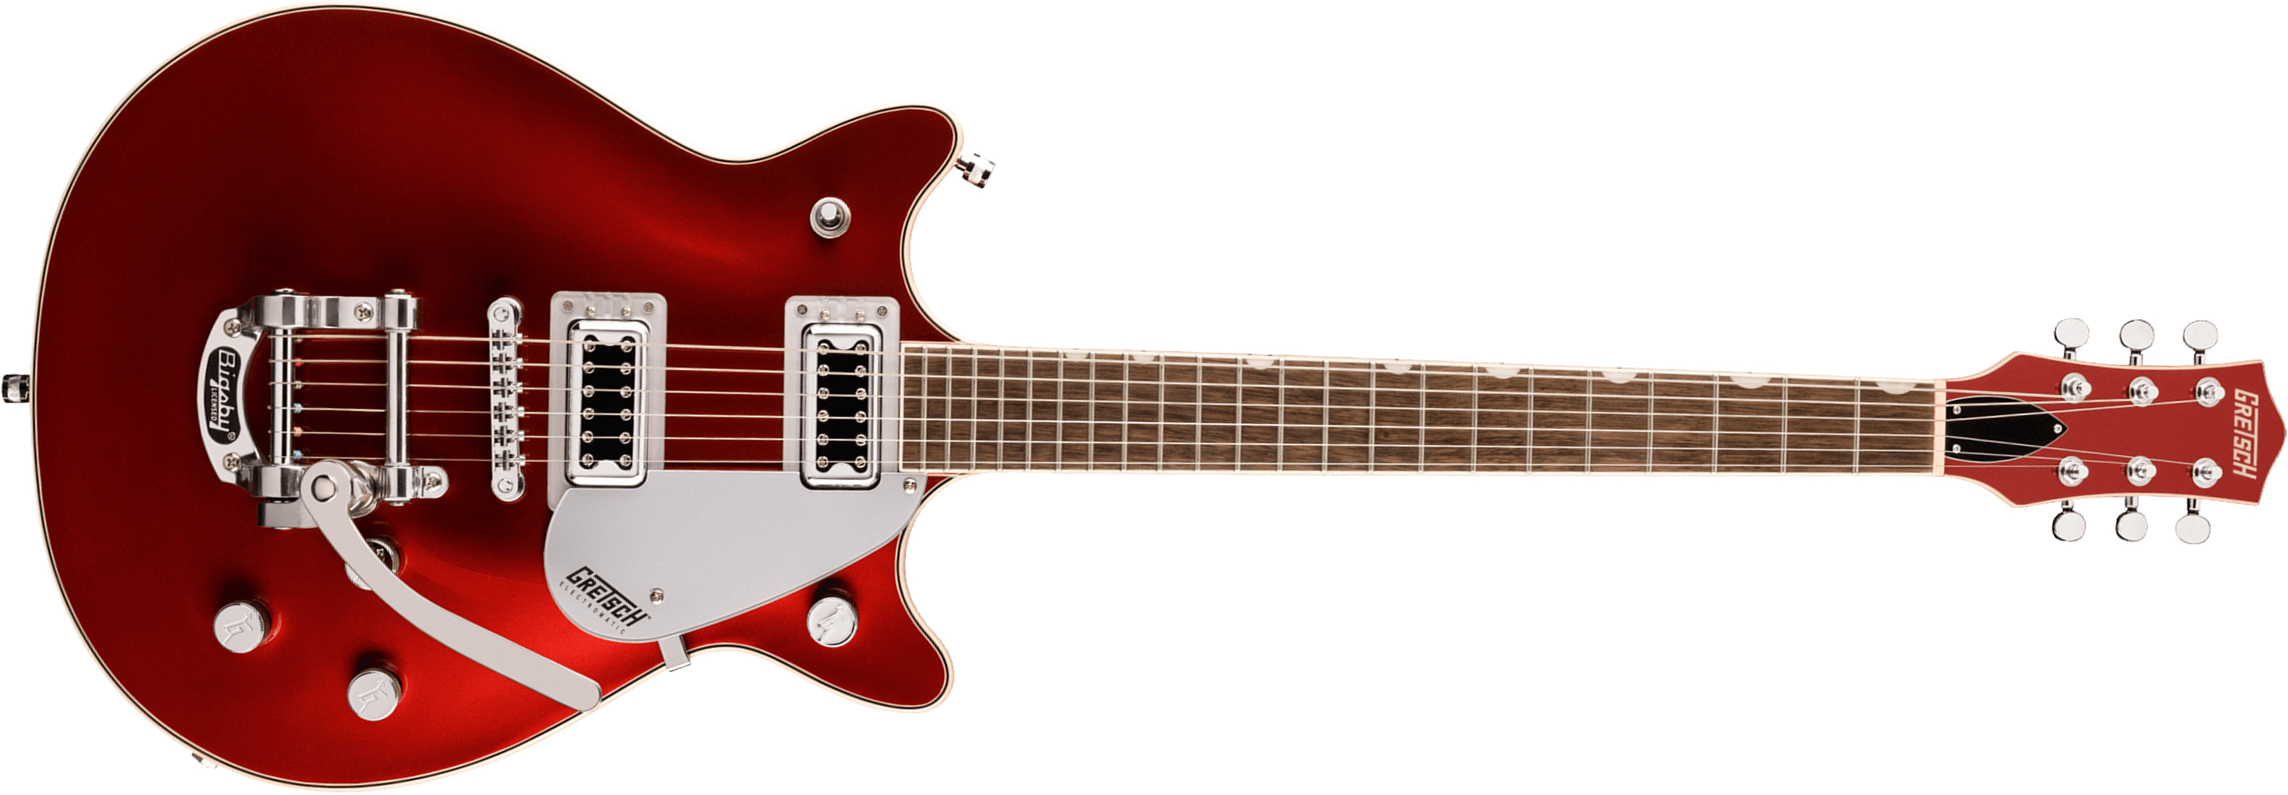 Gretsch G5232t Bigsby Electromatic Double Jet Ft 2h Trem Lau - Firestick Red - Double cut electric guitar - Main picture